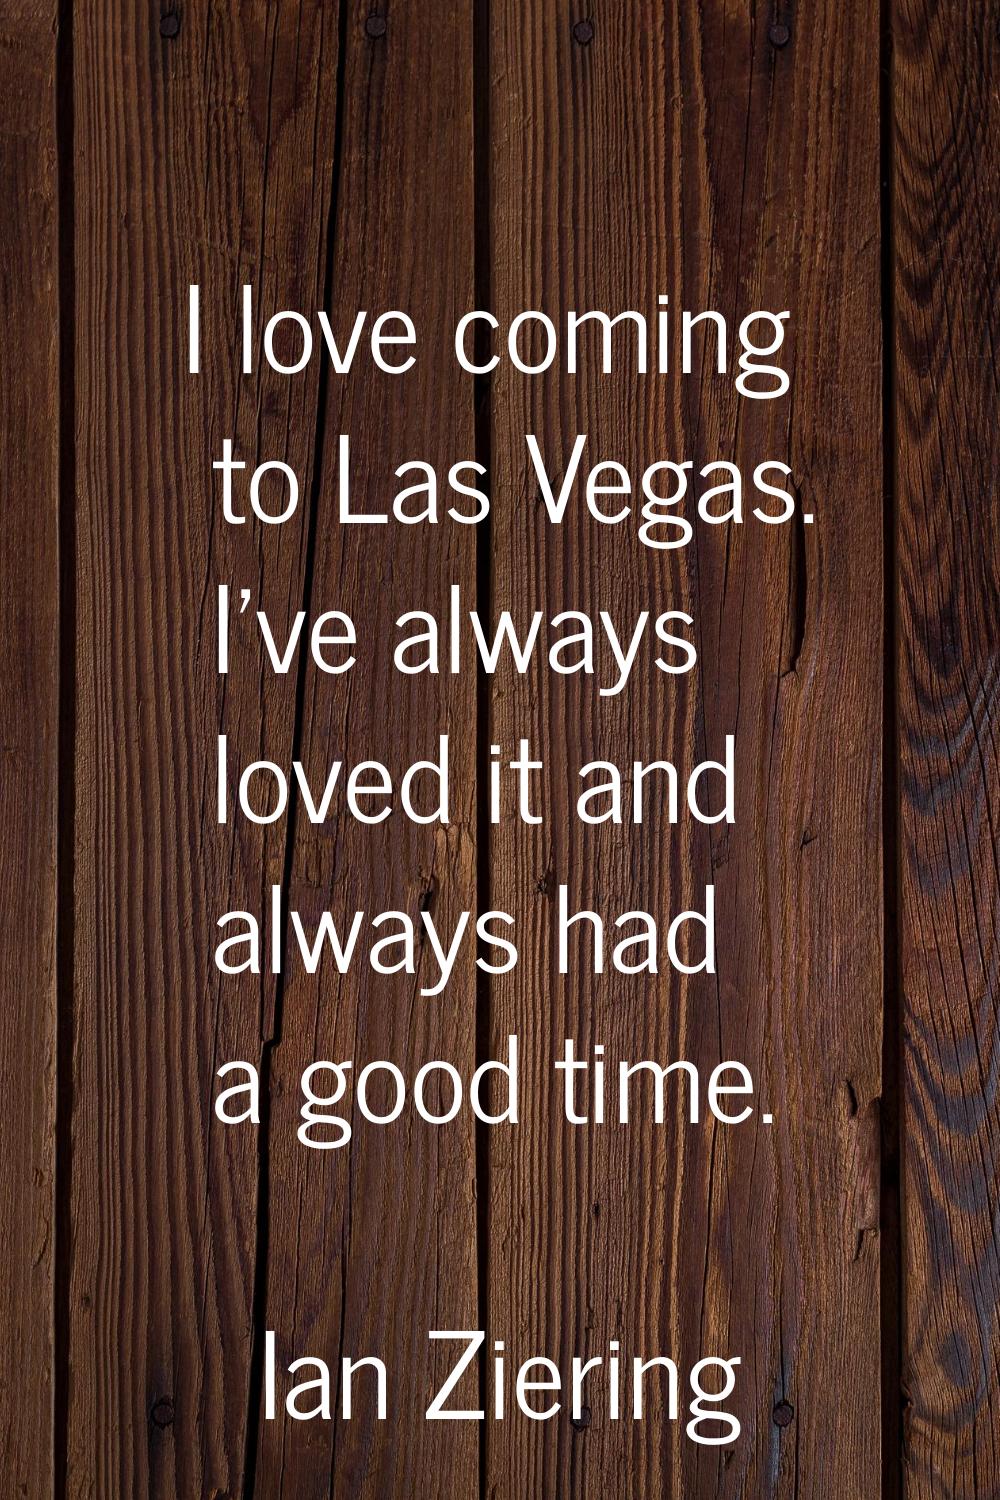 I love coming to Las Vegas. I've always loved it and always had a good time.